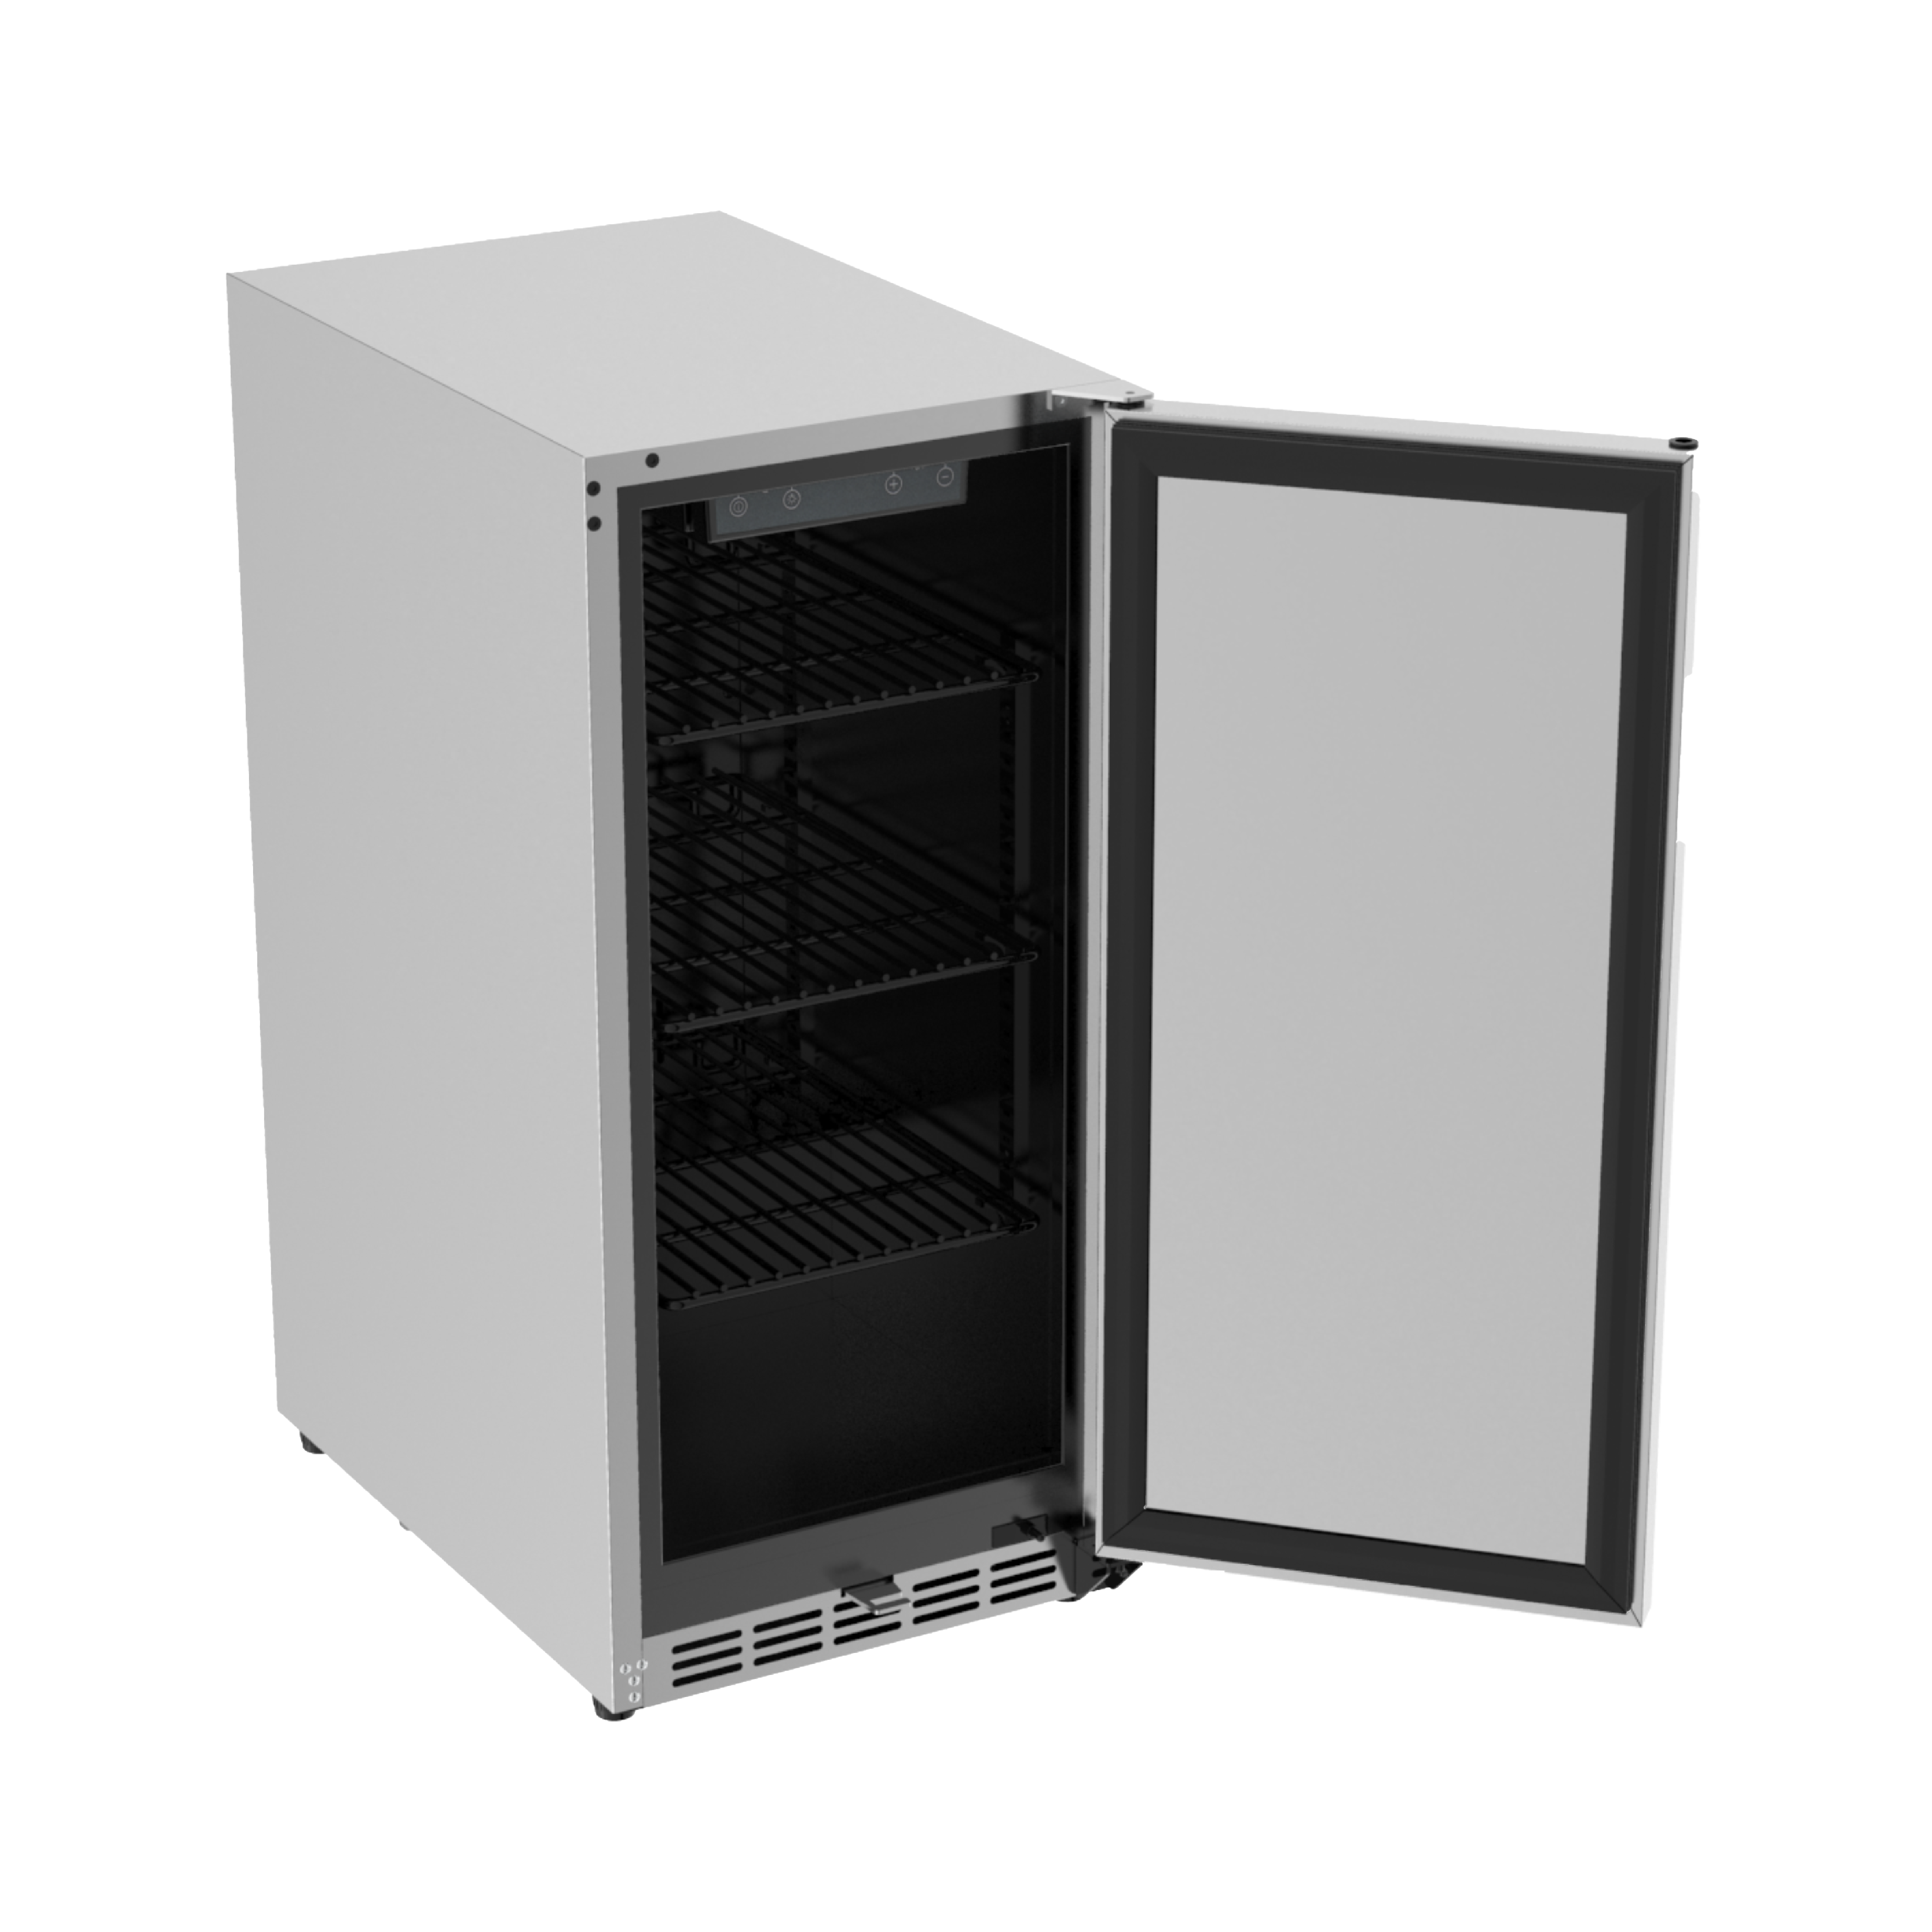 Side view of a 3.18 Cu Ft Undercounter Beverage Outdoor Refrigerator 96 cans with the door open, showcasing 3 bottle shelves and a digital temperature control panel